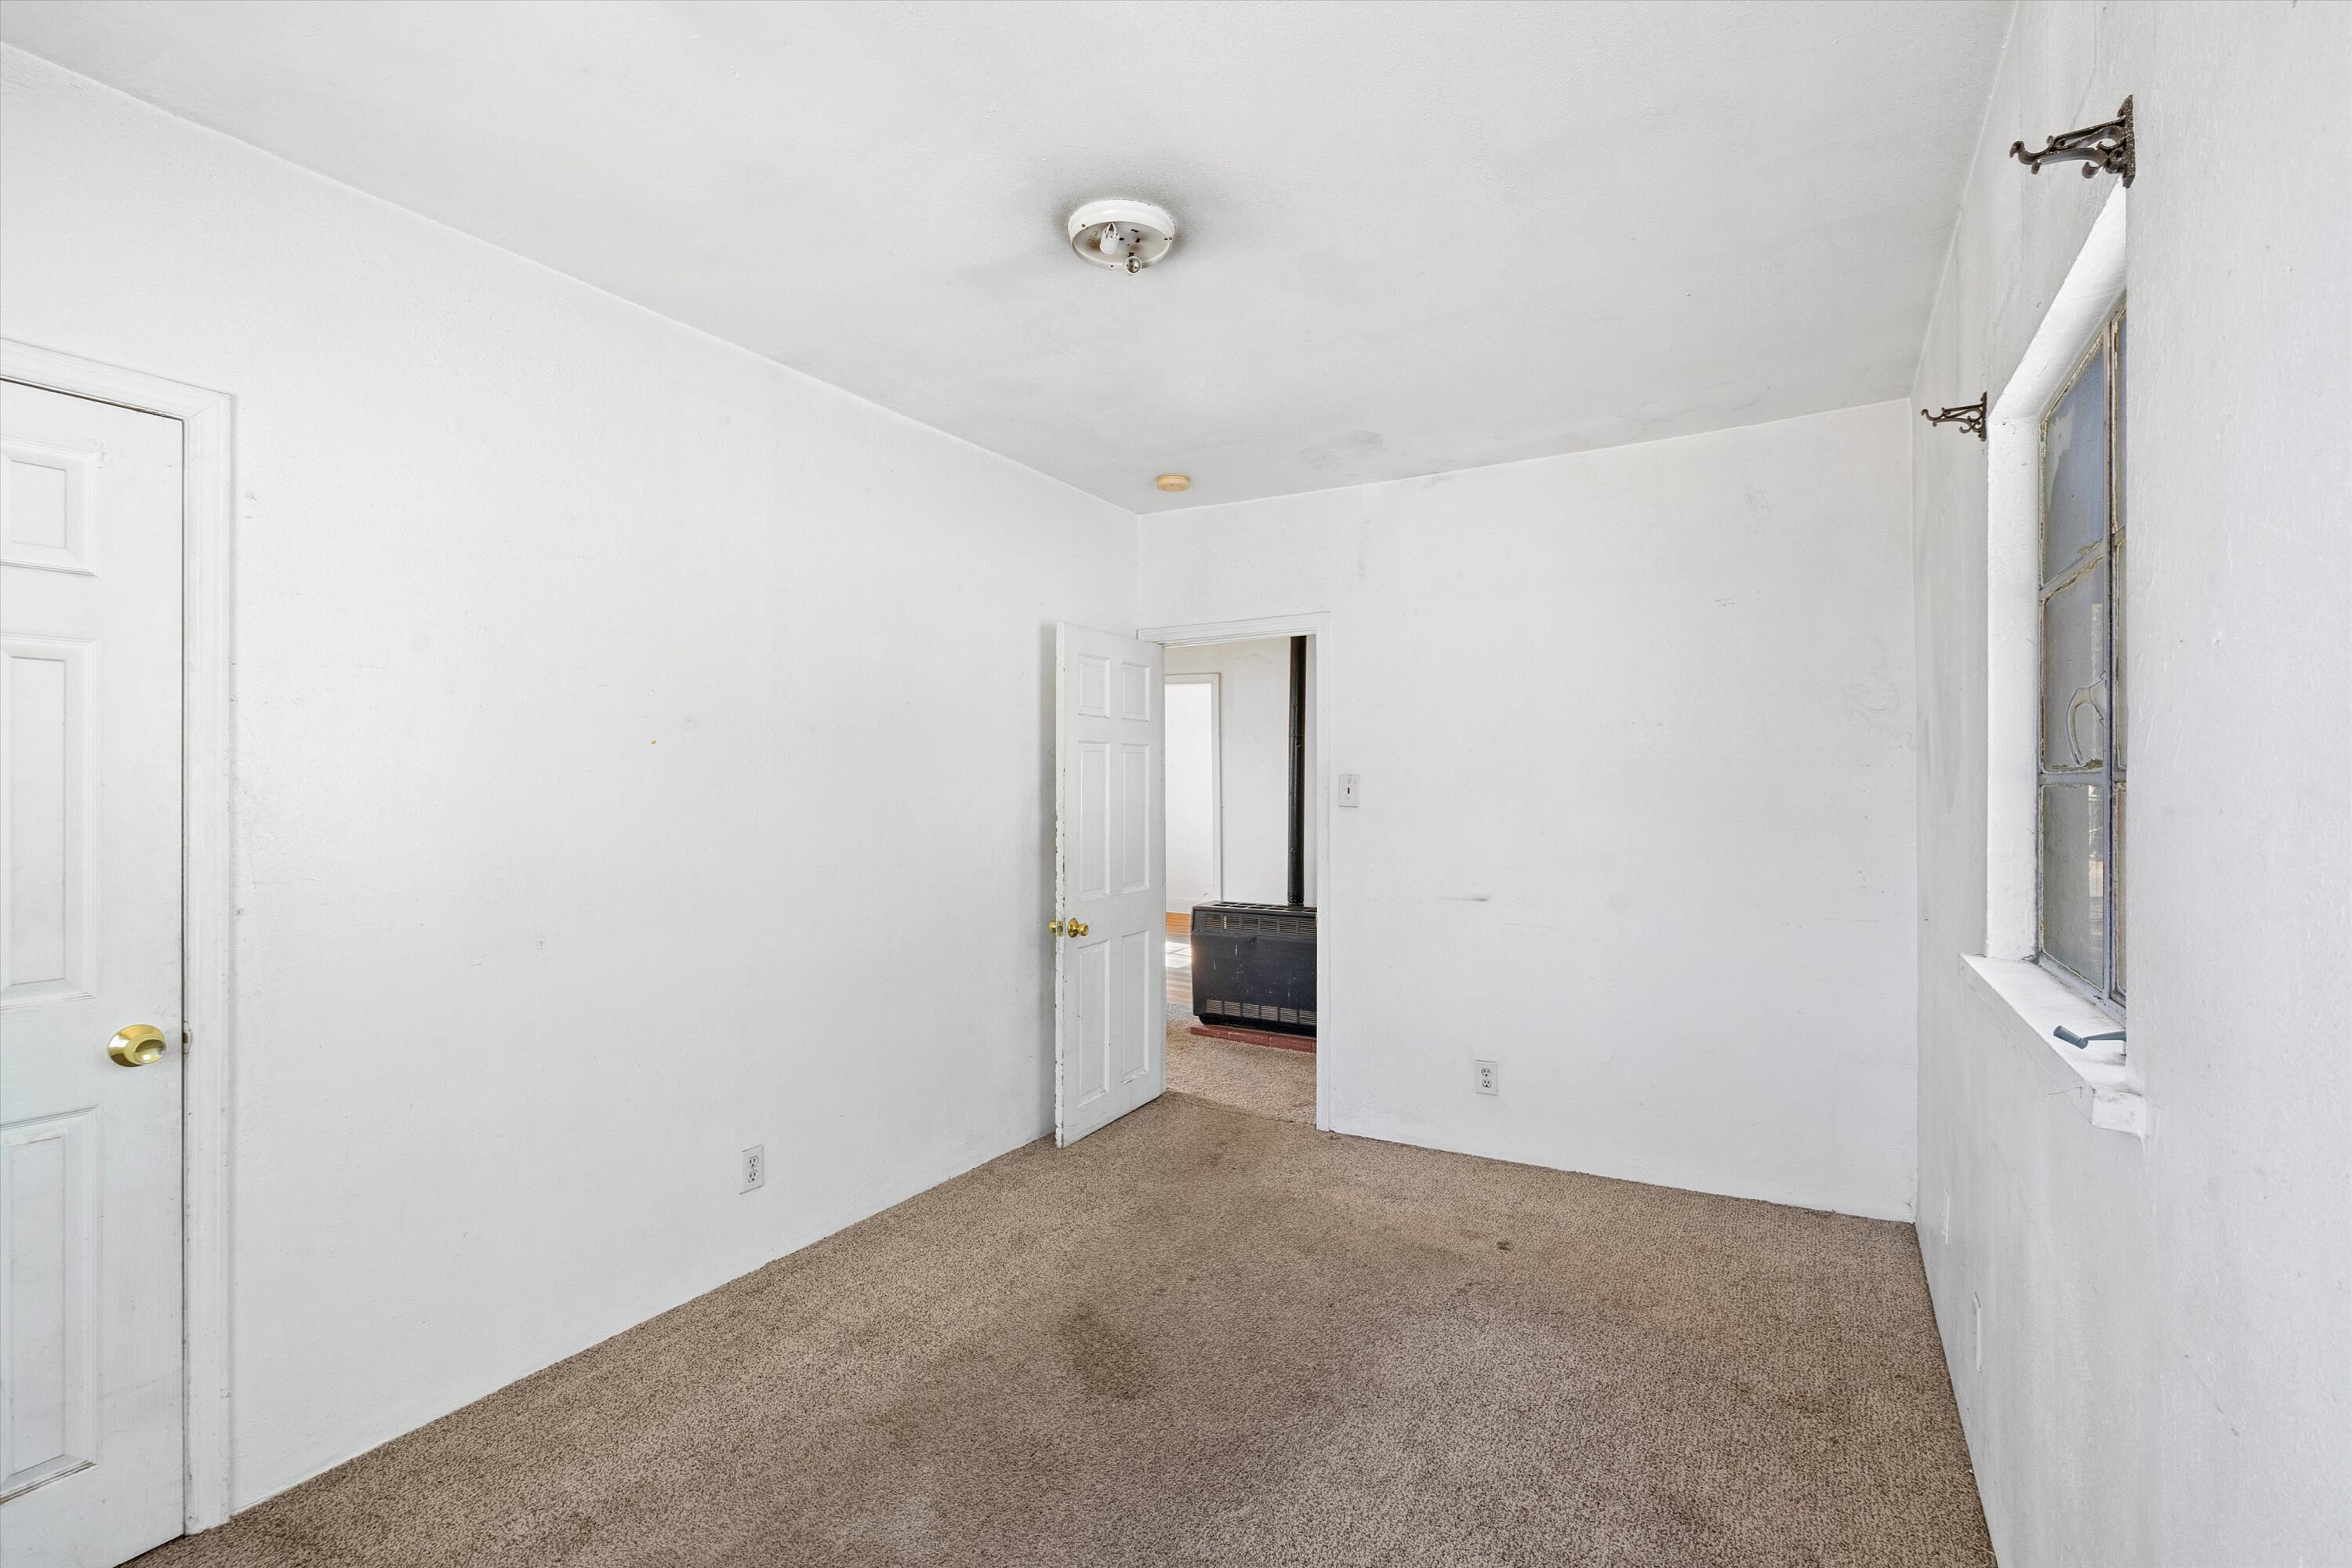 711 Hardy Avenue SW, Albuquerque, New Mexico 87105, 2 Bedrooms Bedrooms, ,1 BathroomBathrooms,Residential,For Sale,711 Hardy Avenue SW,1061513